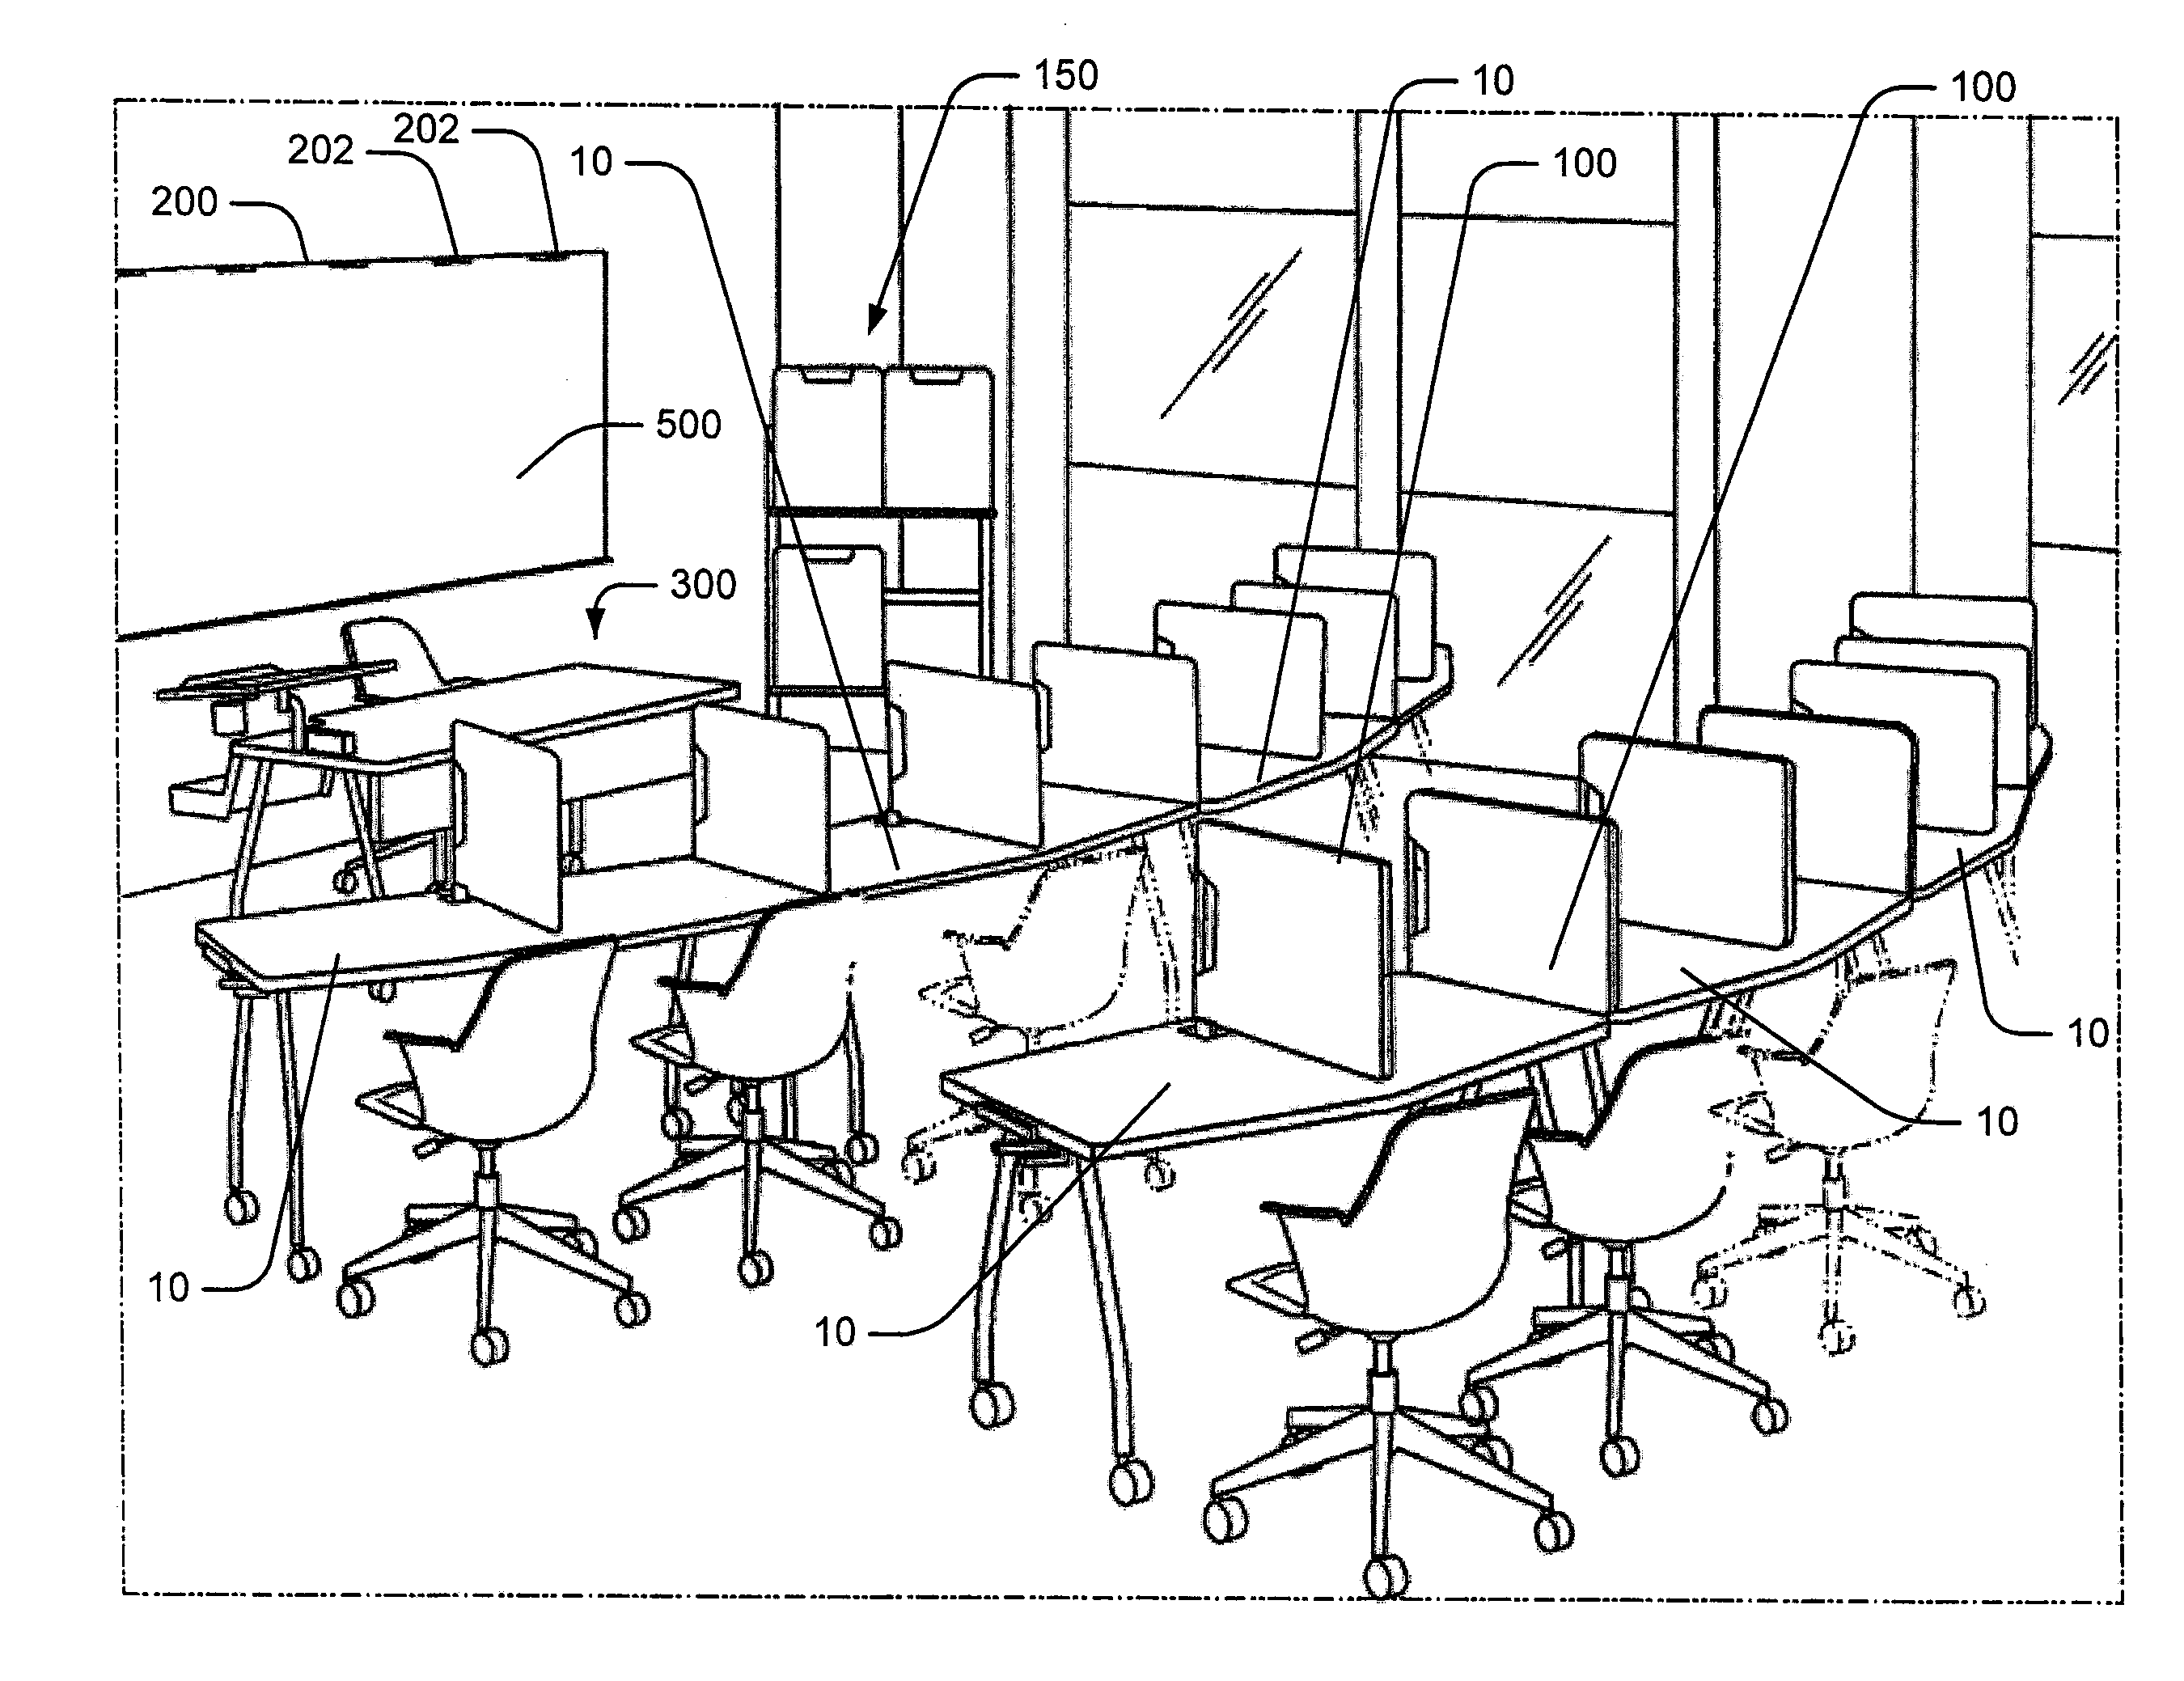 Learning suite furniture system